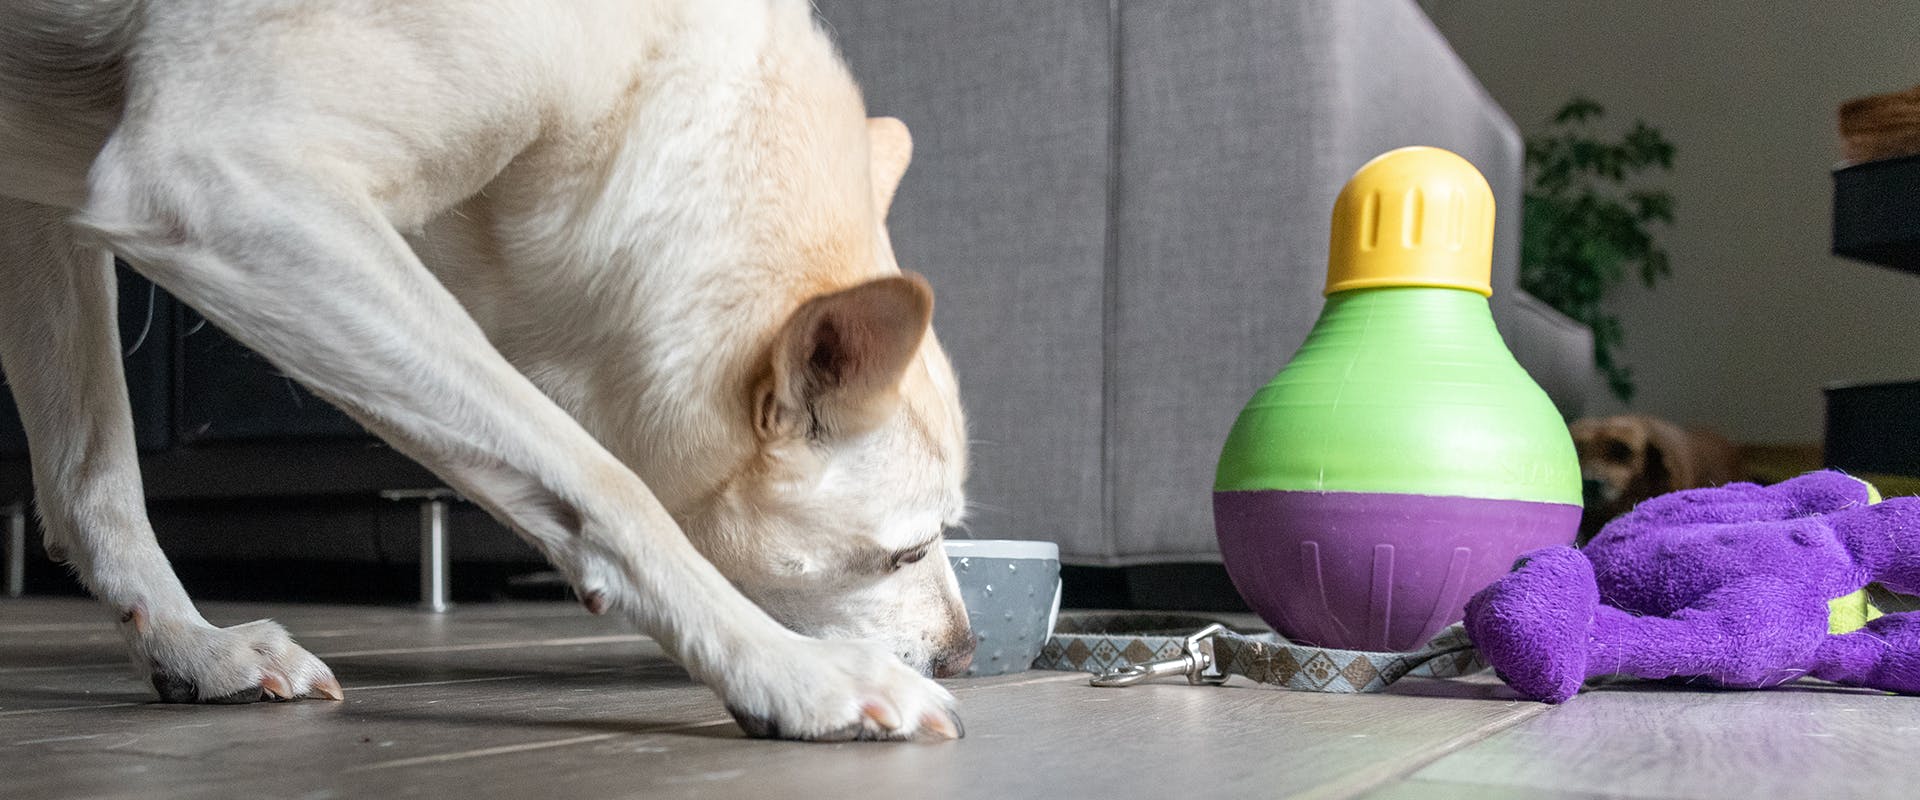 A dog eating treats dispensed from an anxiety toy for dogs